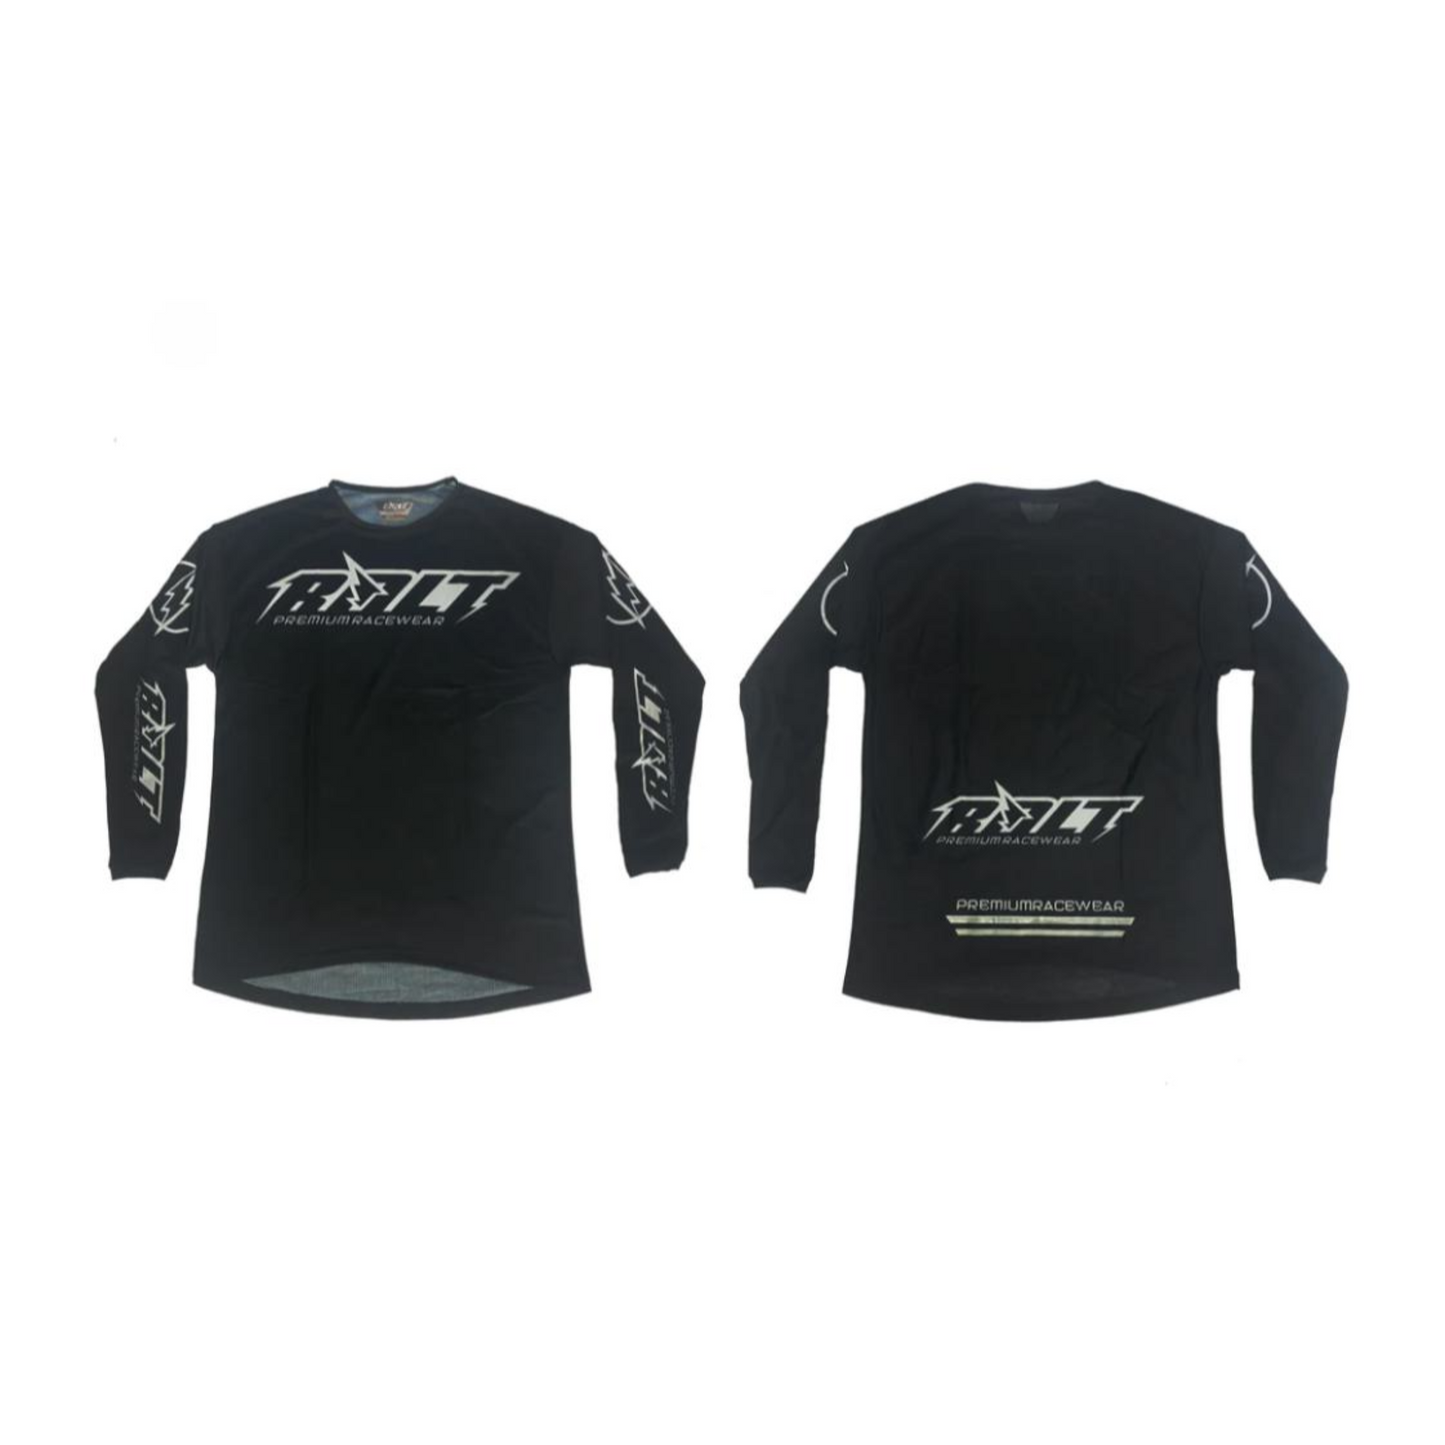 Bolt Everywear Blackout 4.0 Jersey Front and Back